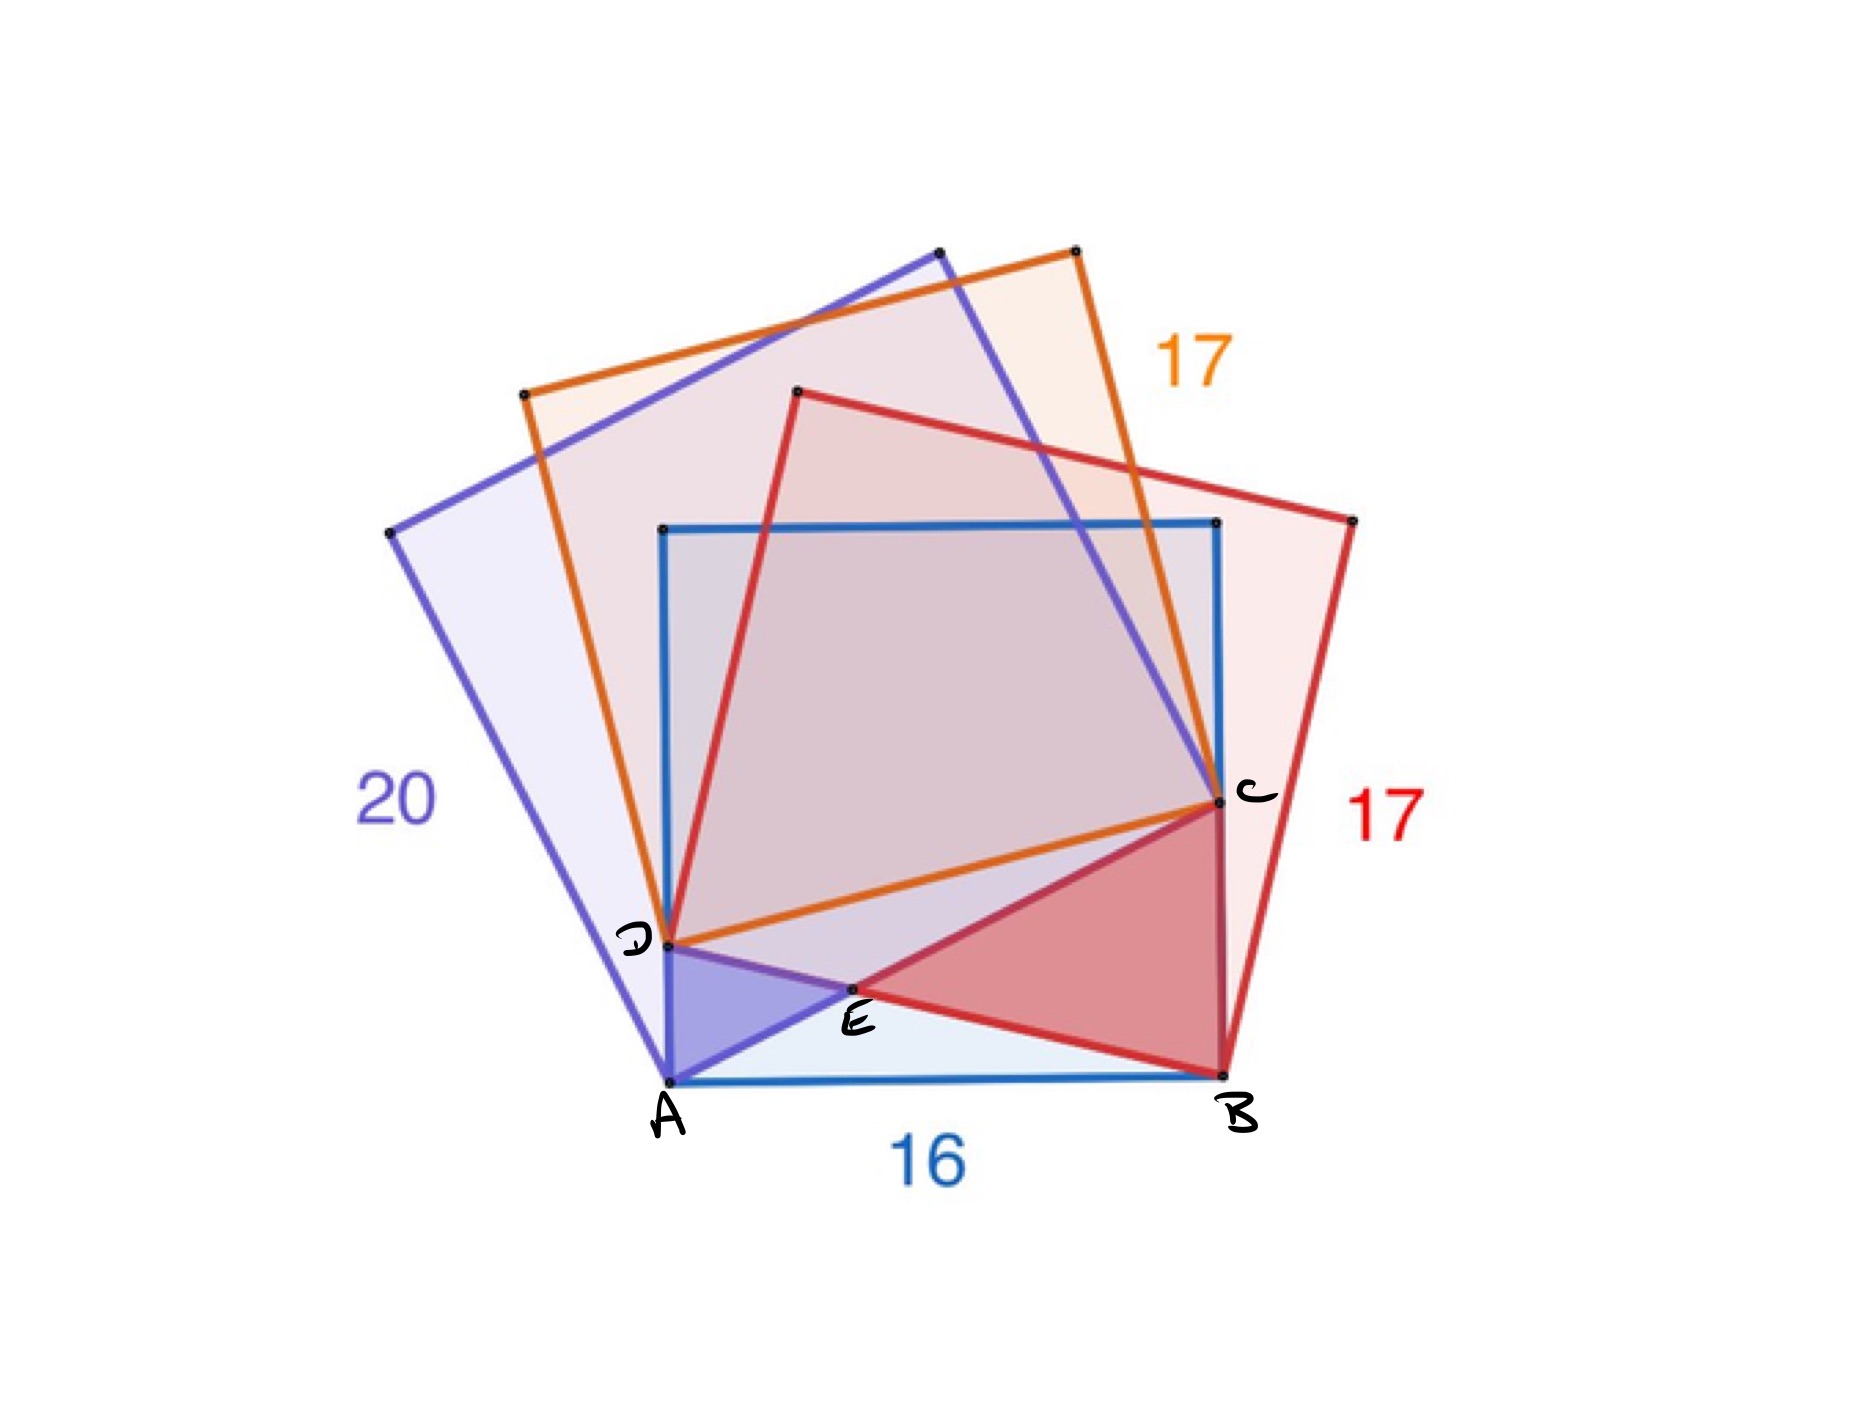 Overlapping squares labelled